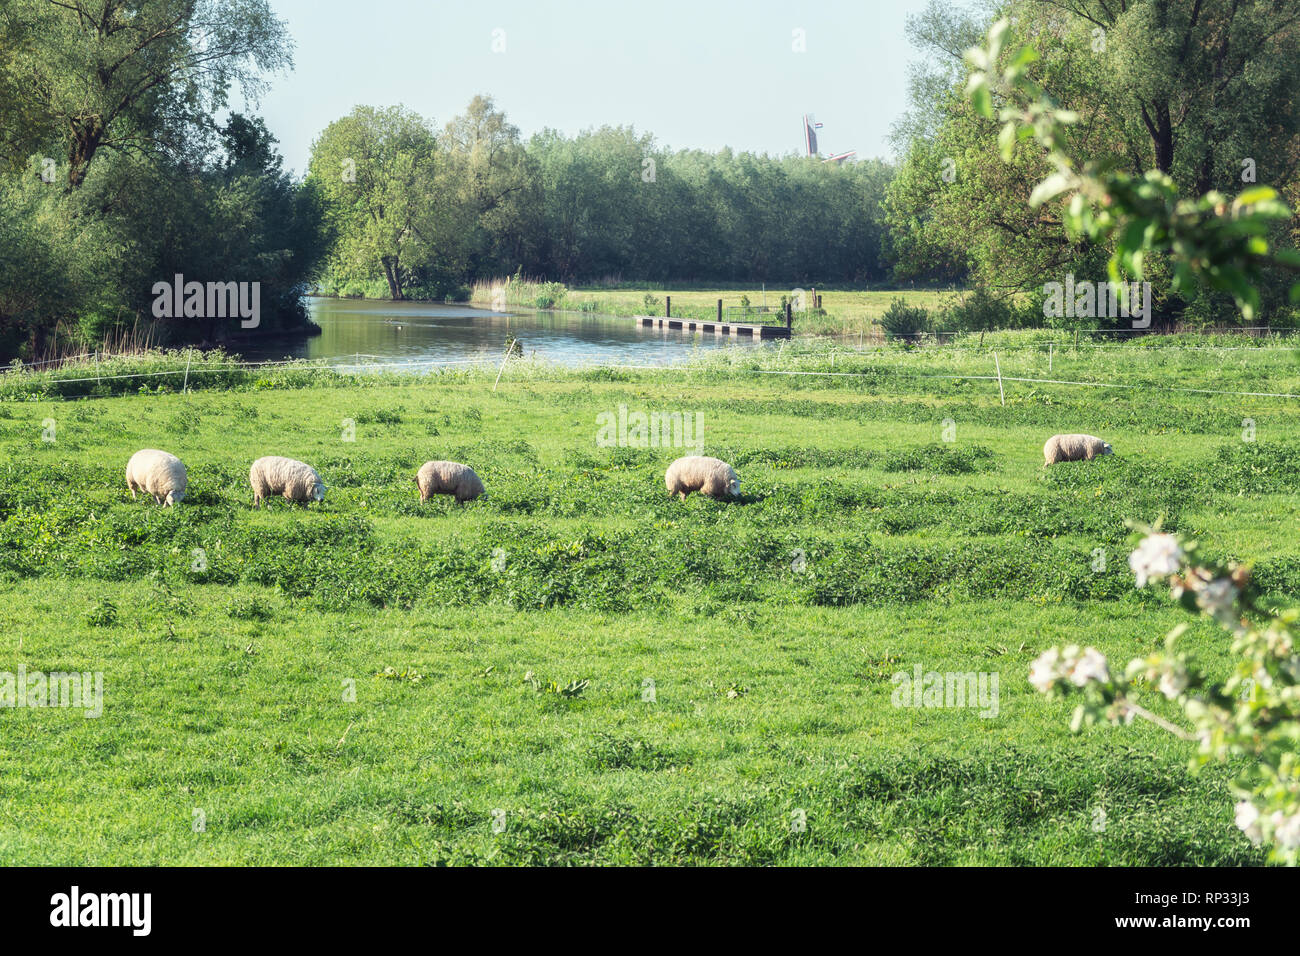 Sheeps grazing in the floodplains of the river Linge in the Betuwe region in The Netherlands Stock Photo